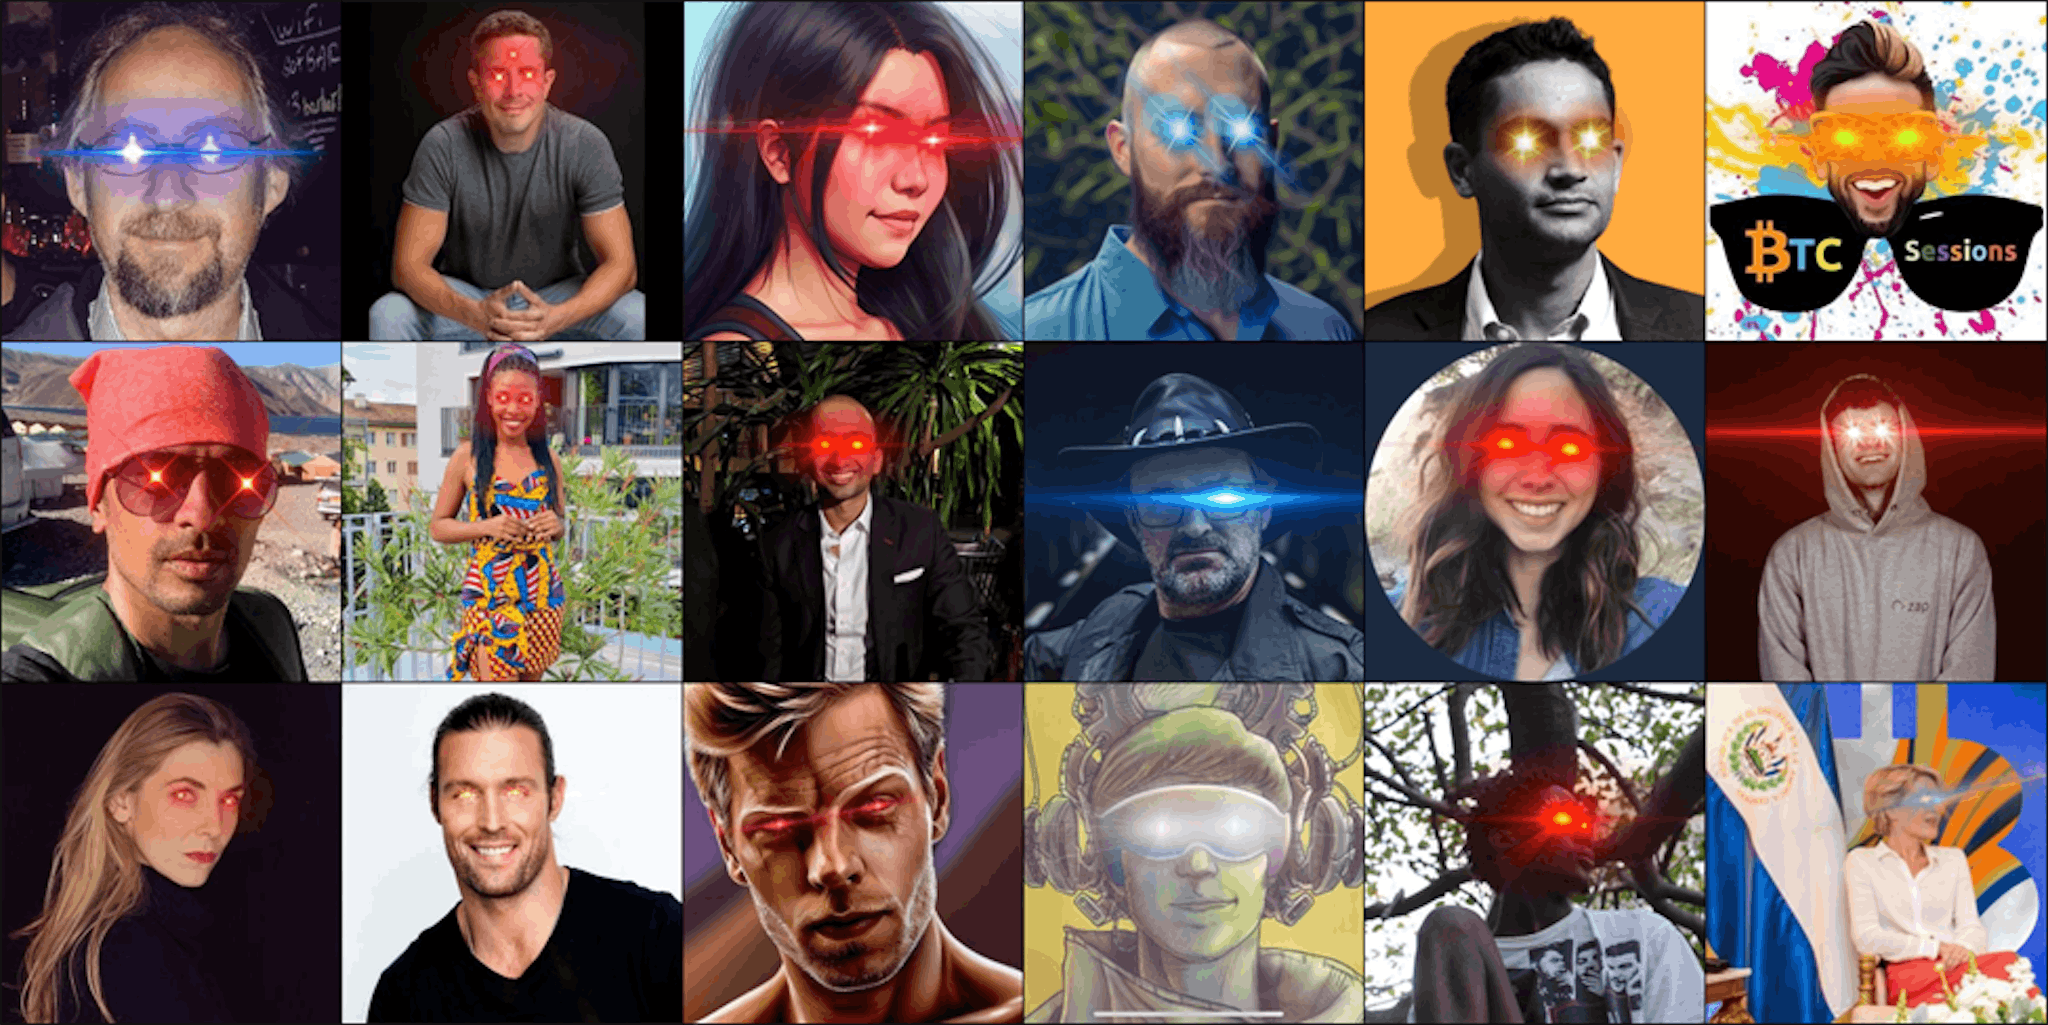 Many Bitcoiners continue to carry laser eyes in their profile pictures